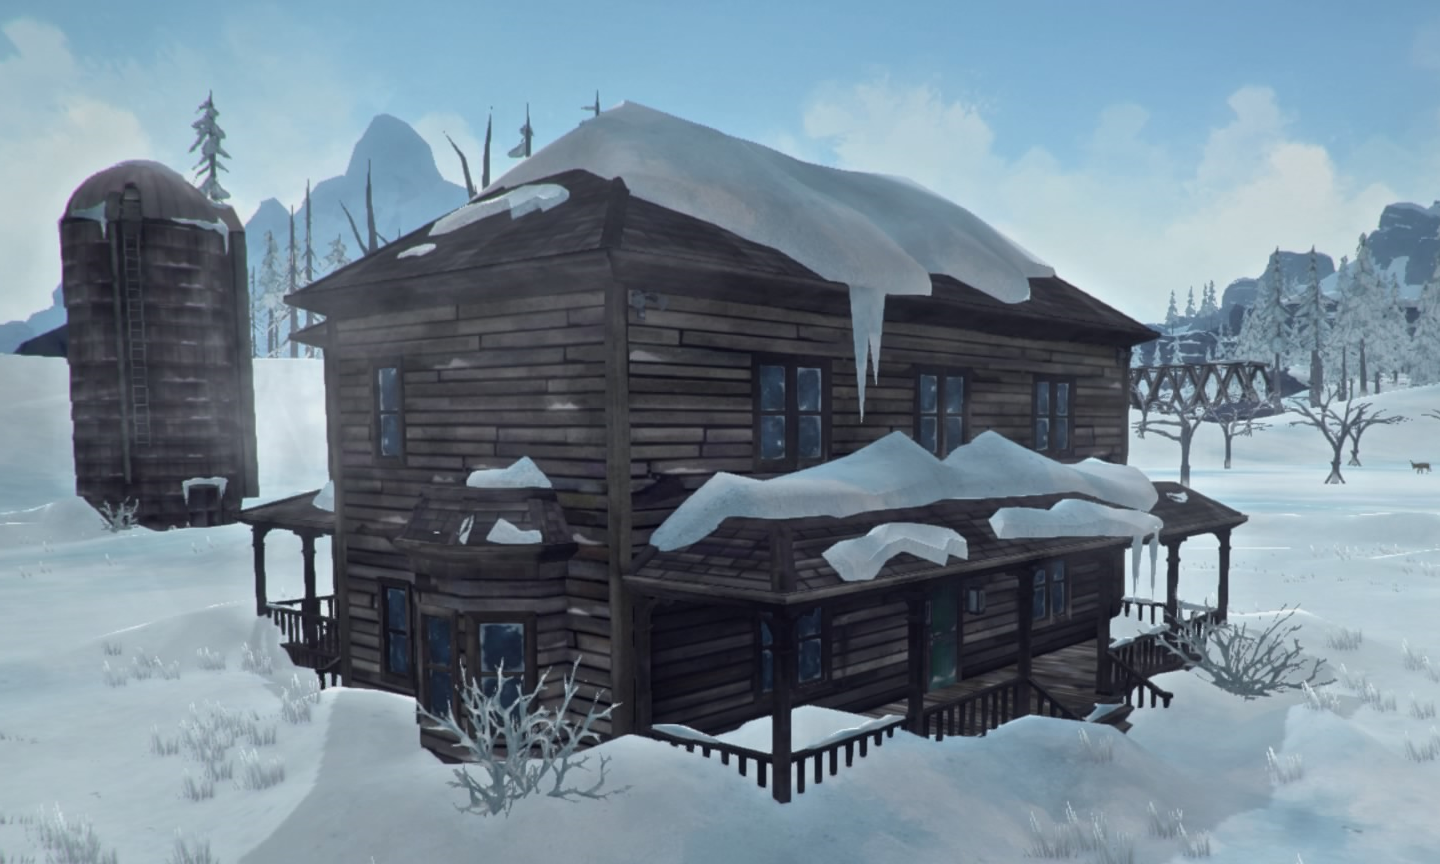 Tales from the far territory. The long Dark Tales from the far Territory карта. The long Dark Tales from the far Territory новая локация. Trappers Homestead the long Dark. Кемп the long Dark.